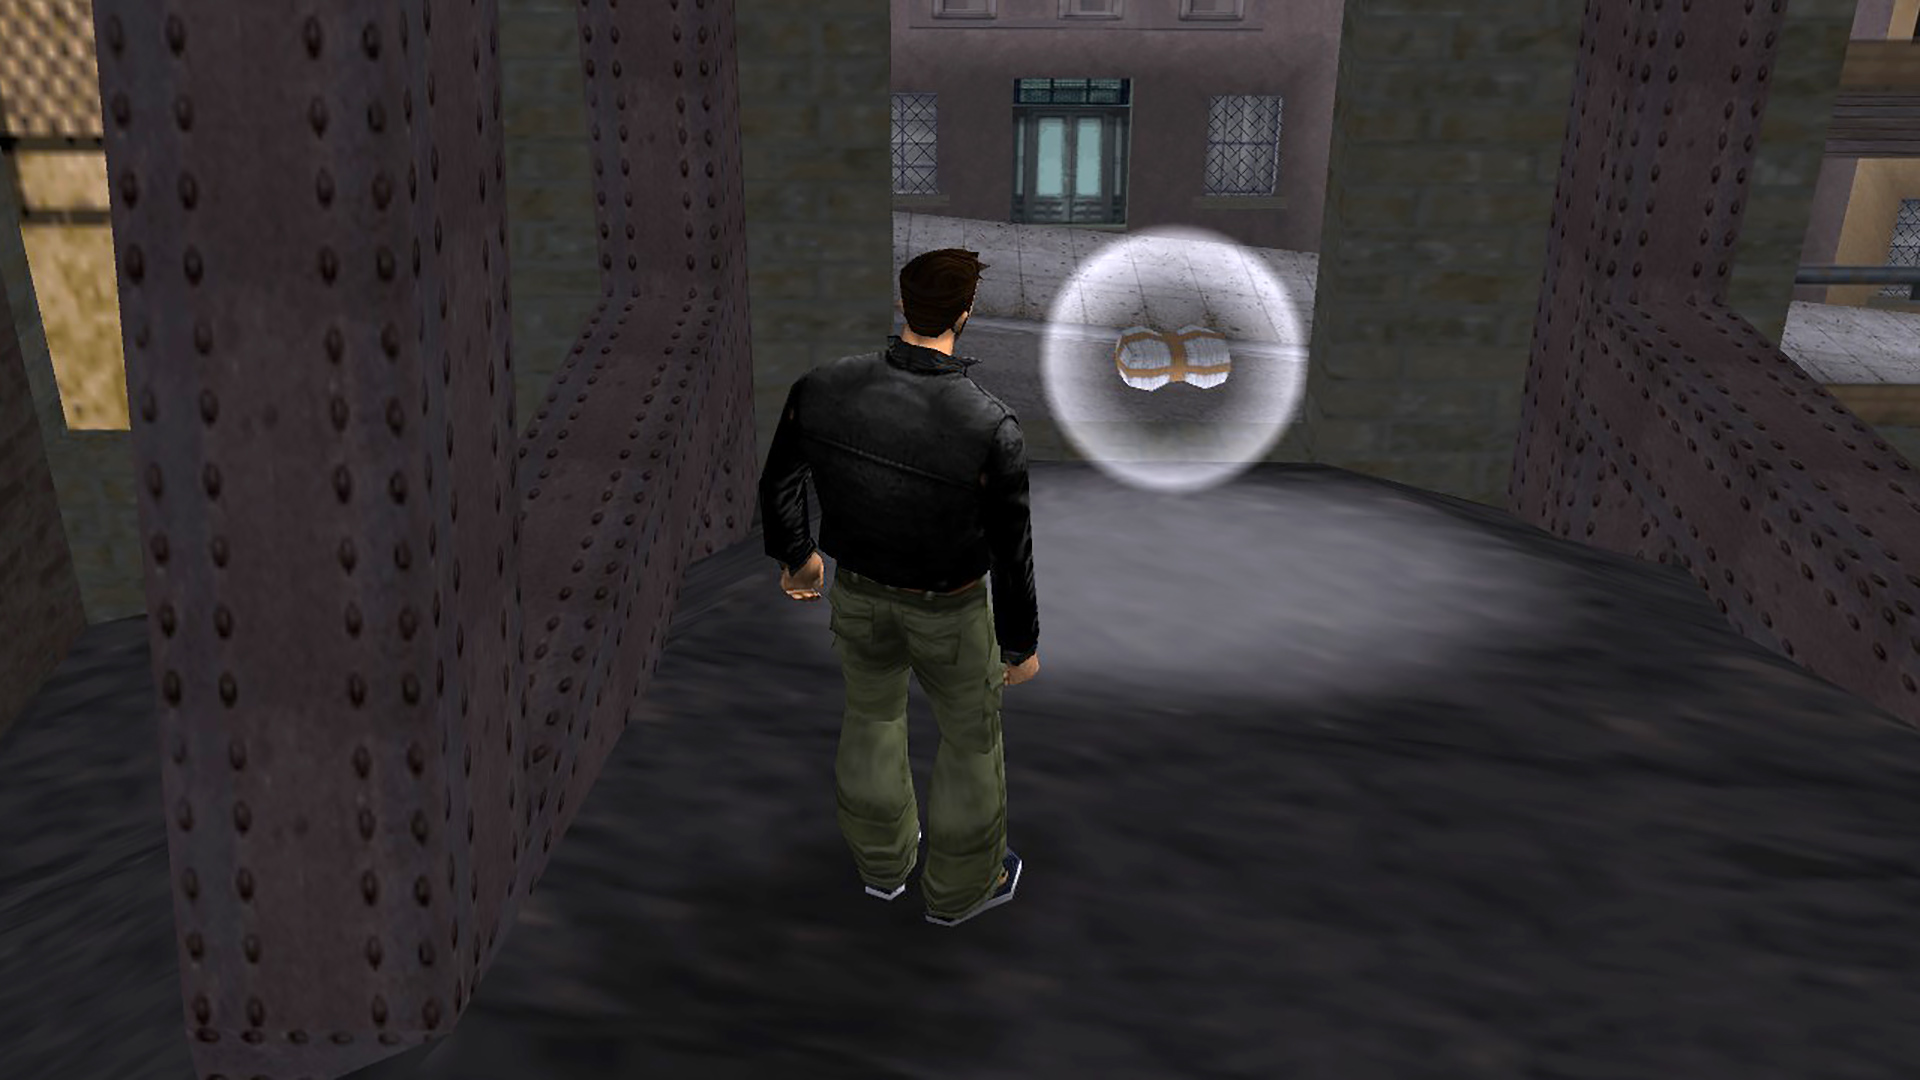 GTA 3 hidden packages locations to unlock weapons, armor, and cash